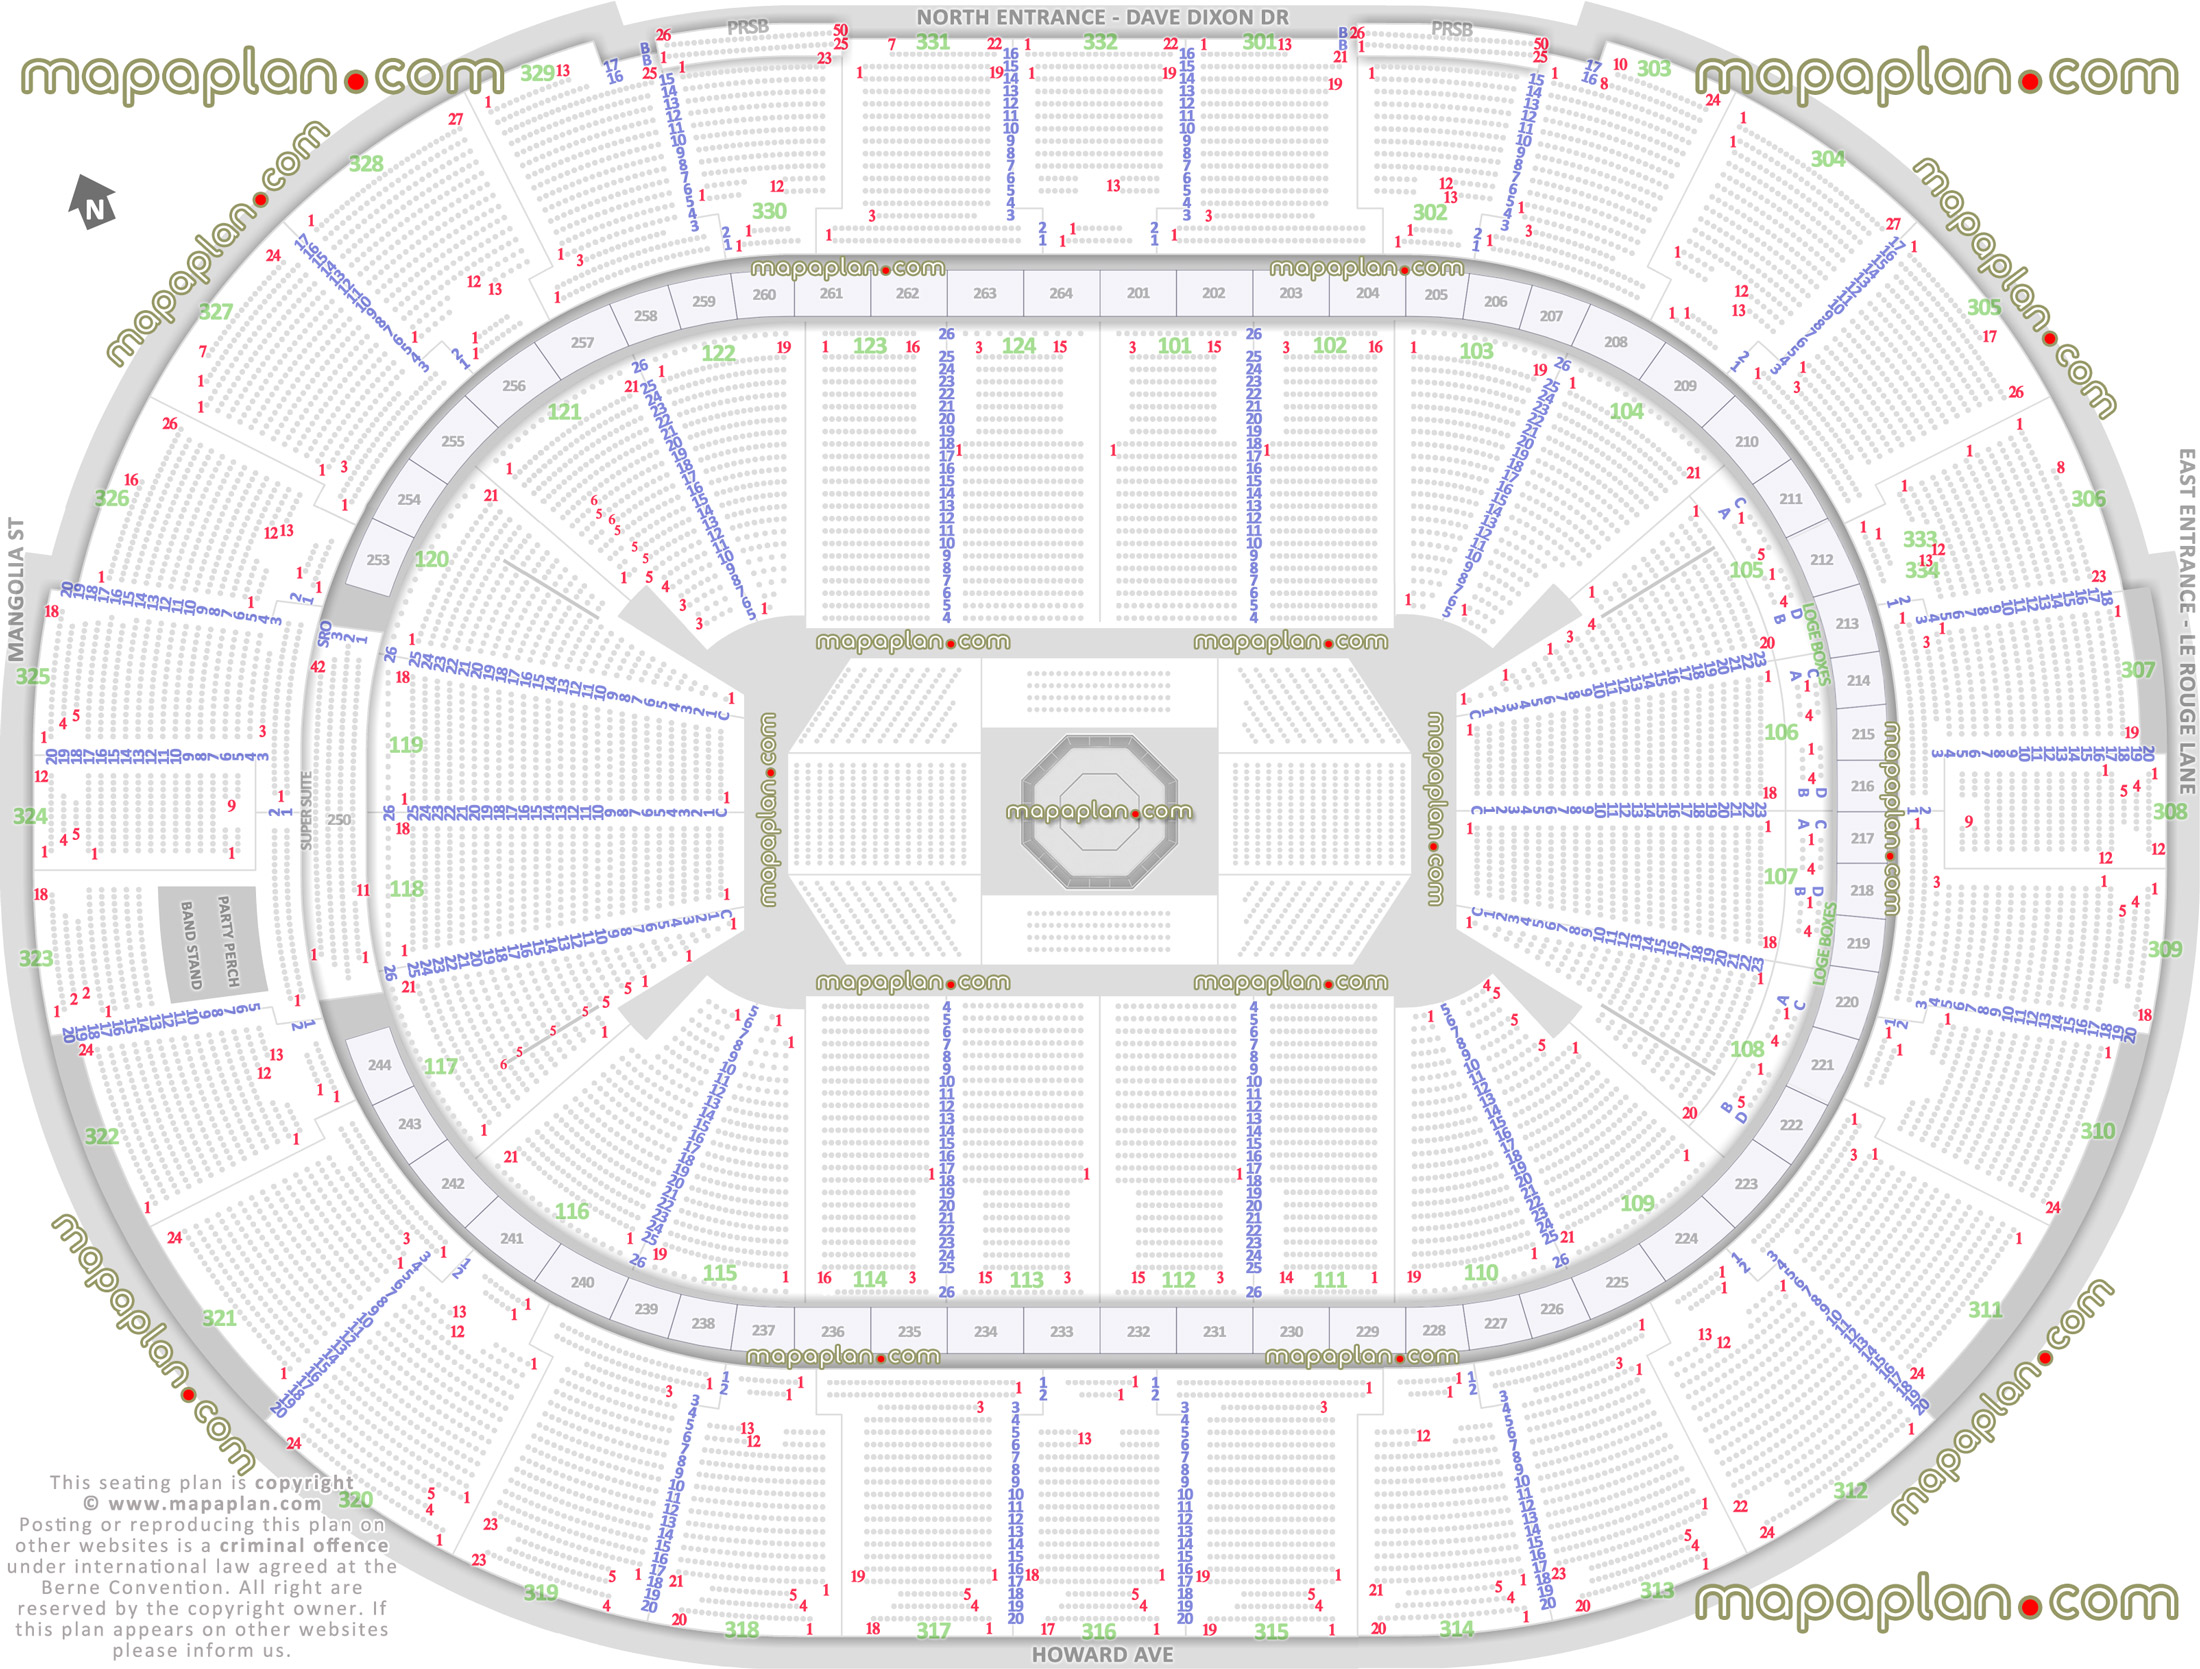 ufc seating chart row max seat capacity numbers rows each section detailed plan mma fights louisiana lower club party suites upper level sections 301 302 303 304 305 306 307 308 309 310 311 312 313 314 315 316 317 318 319 320 321 322 323 324 325 326 327 328 329 330 331 332 New Orleans Smoothie King Center arena seating chart